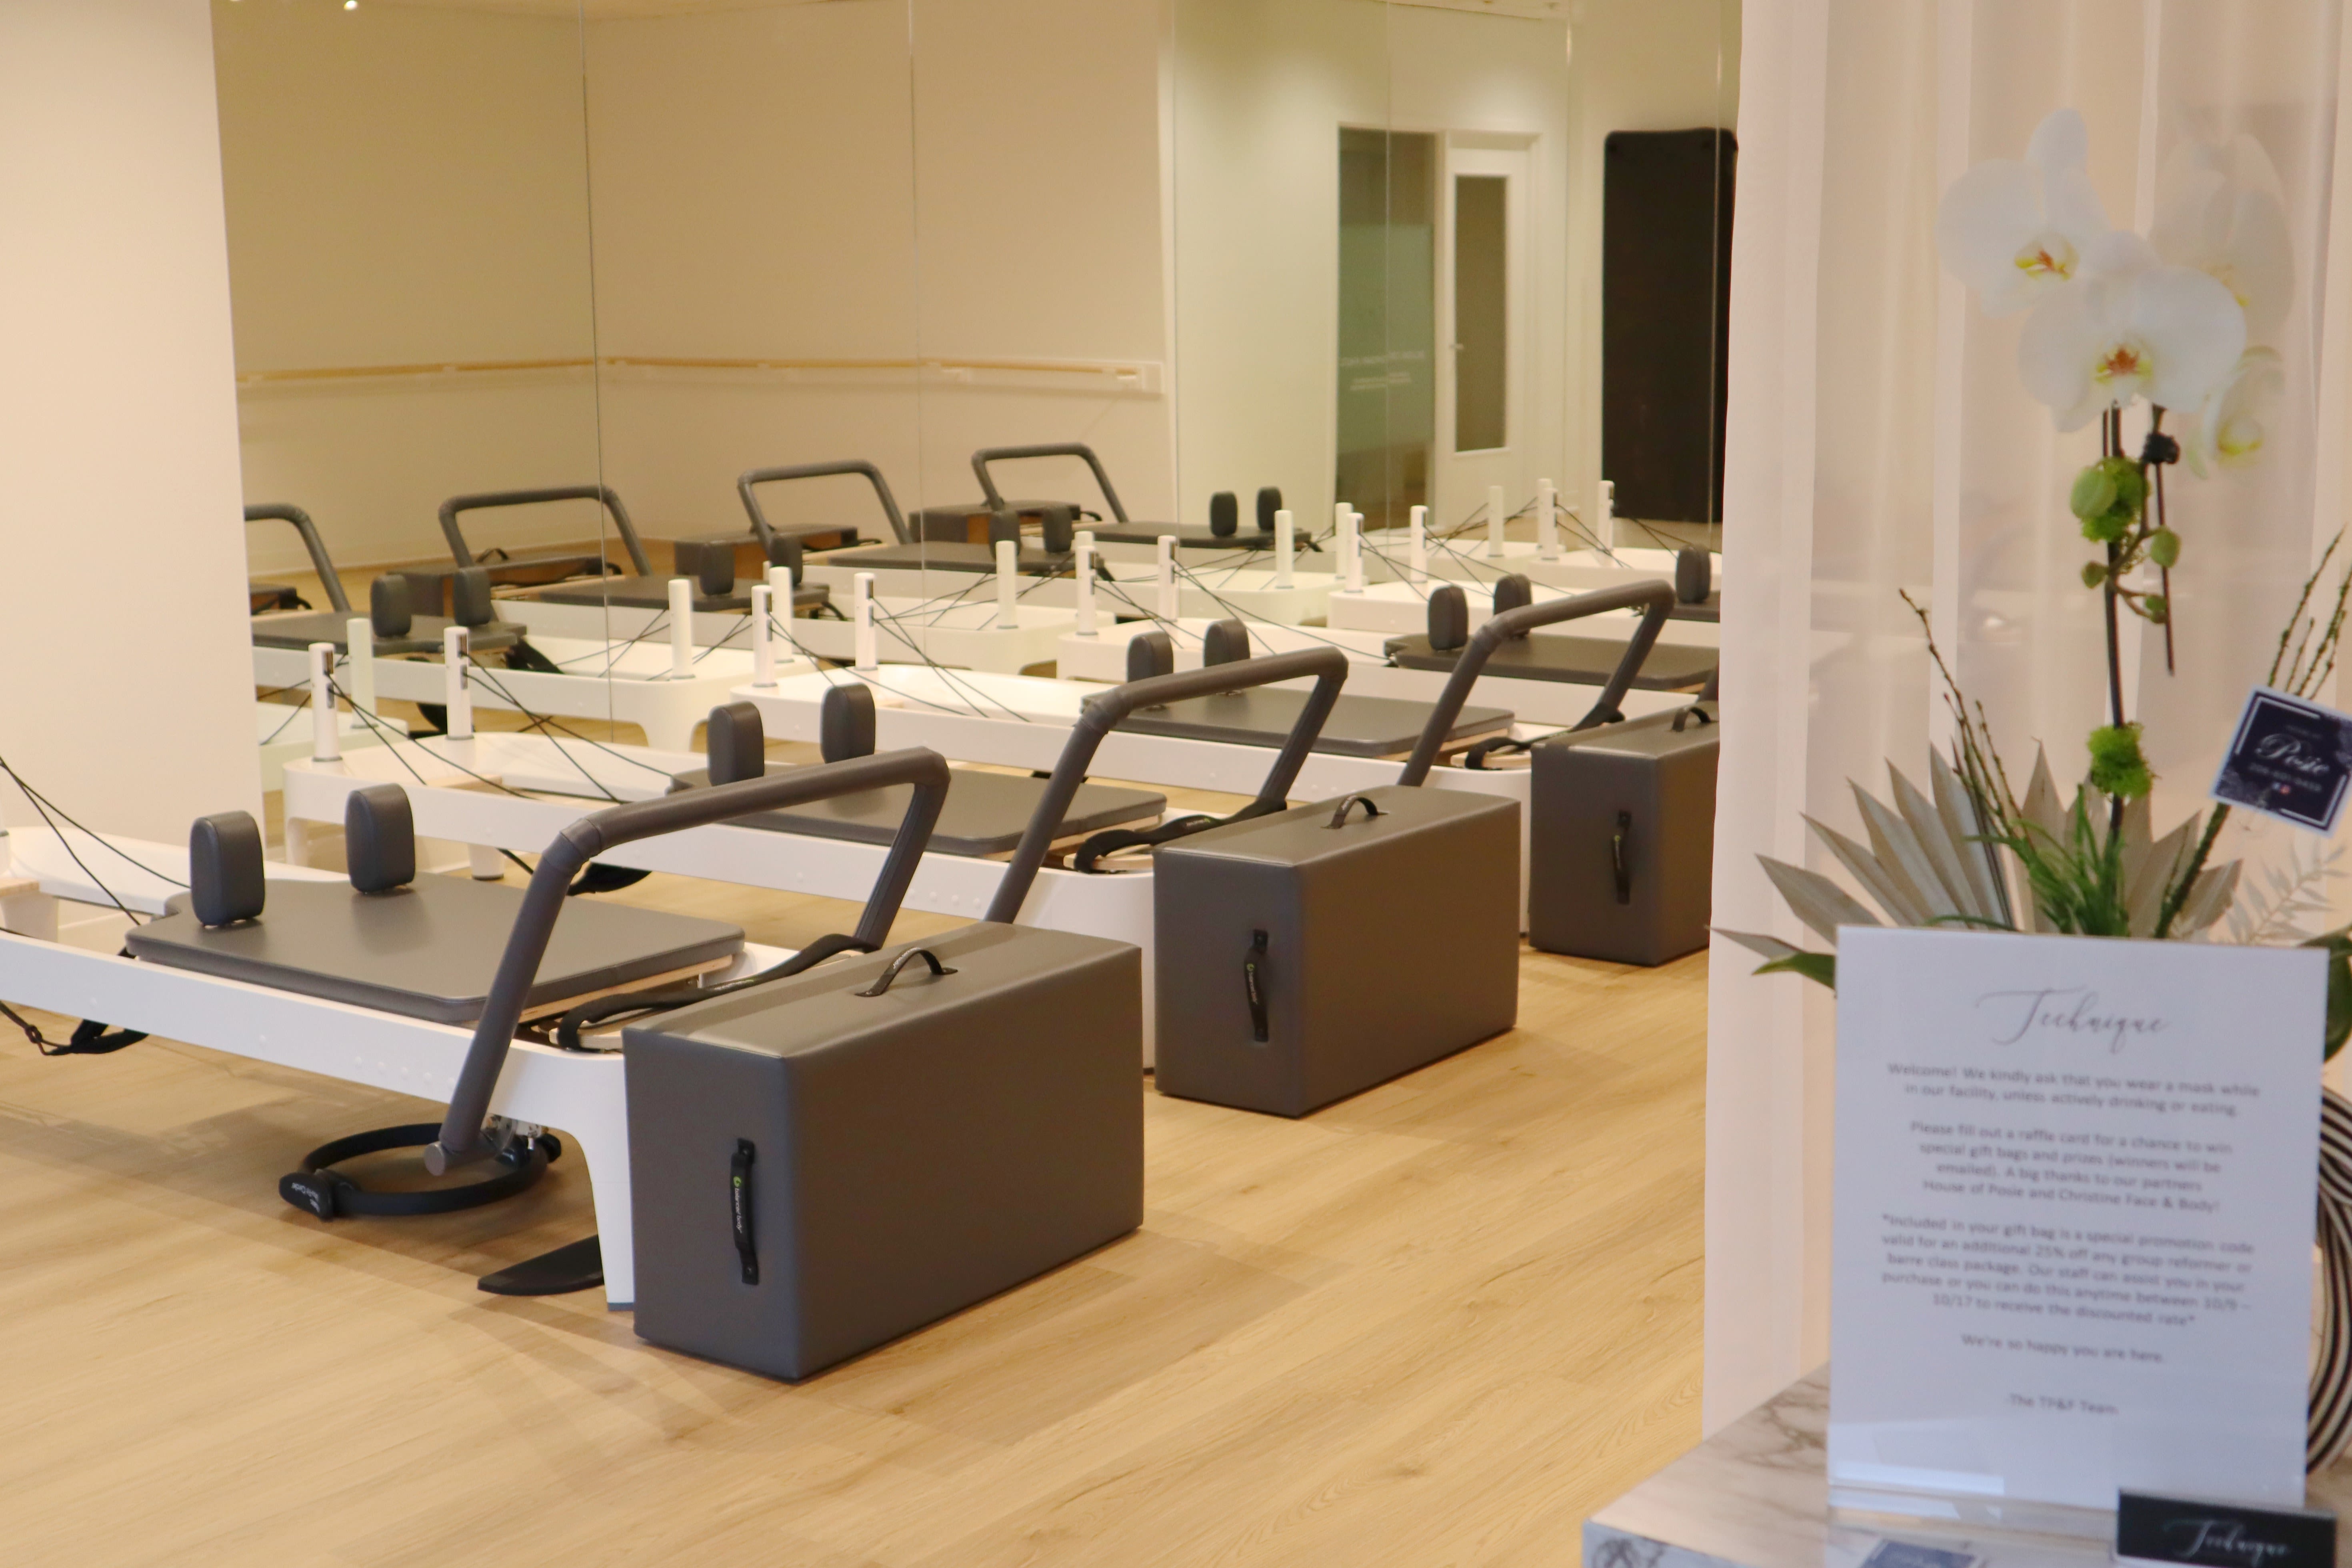 The Pilates Barre Studio: Read Reviews and Book Classes on ClassPass